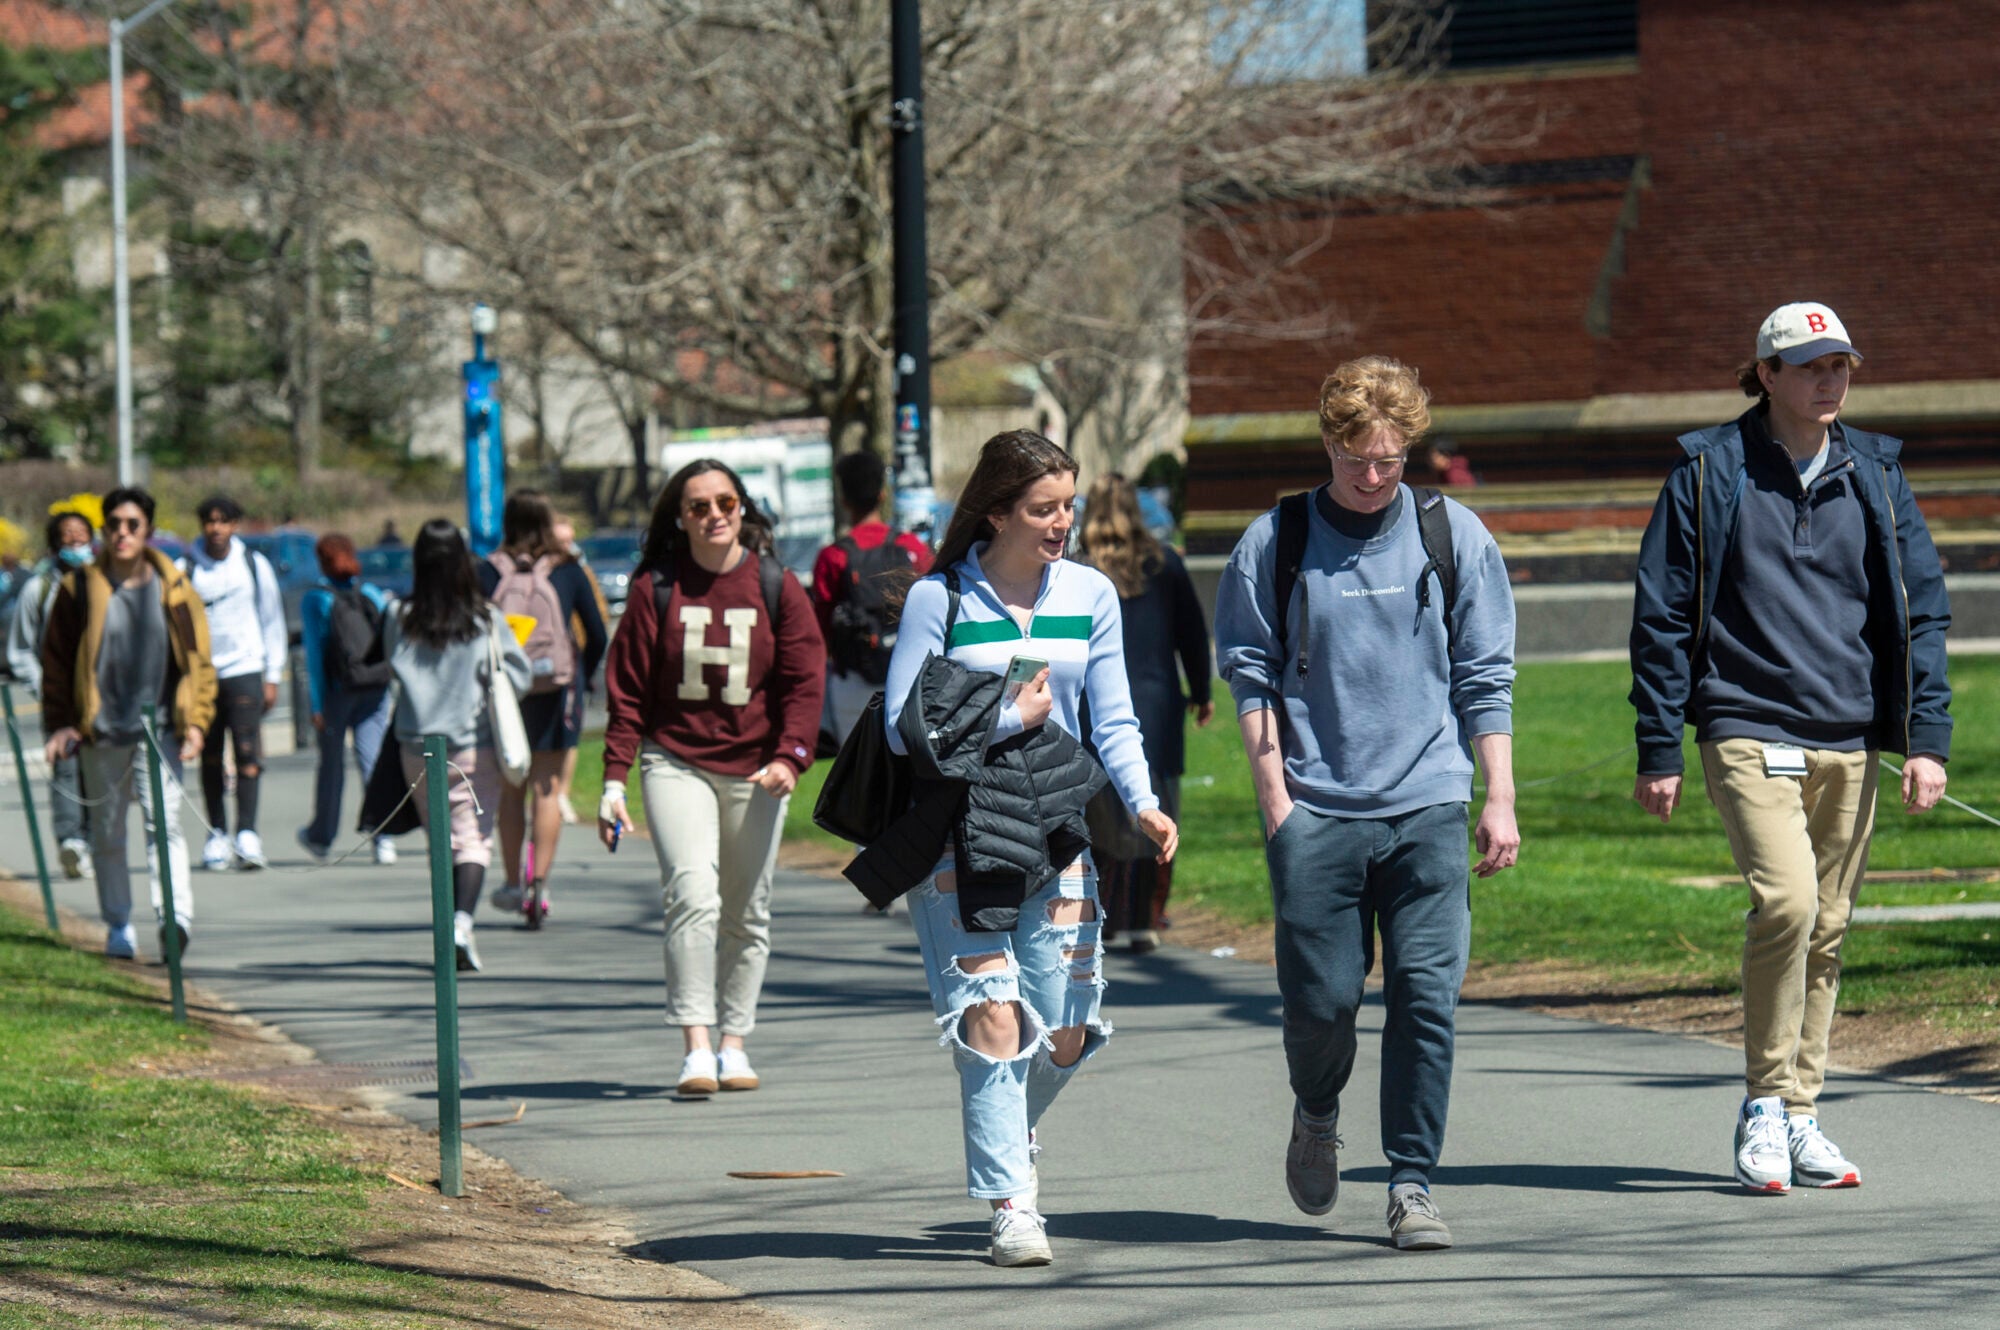 Students walk through campus on an early spring day